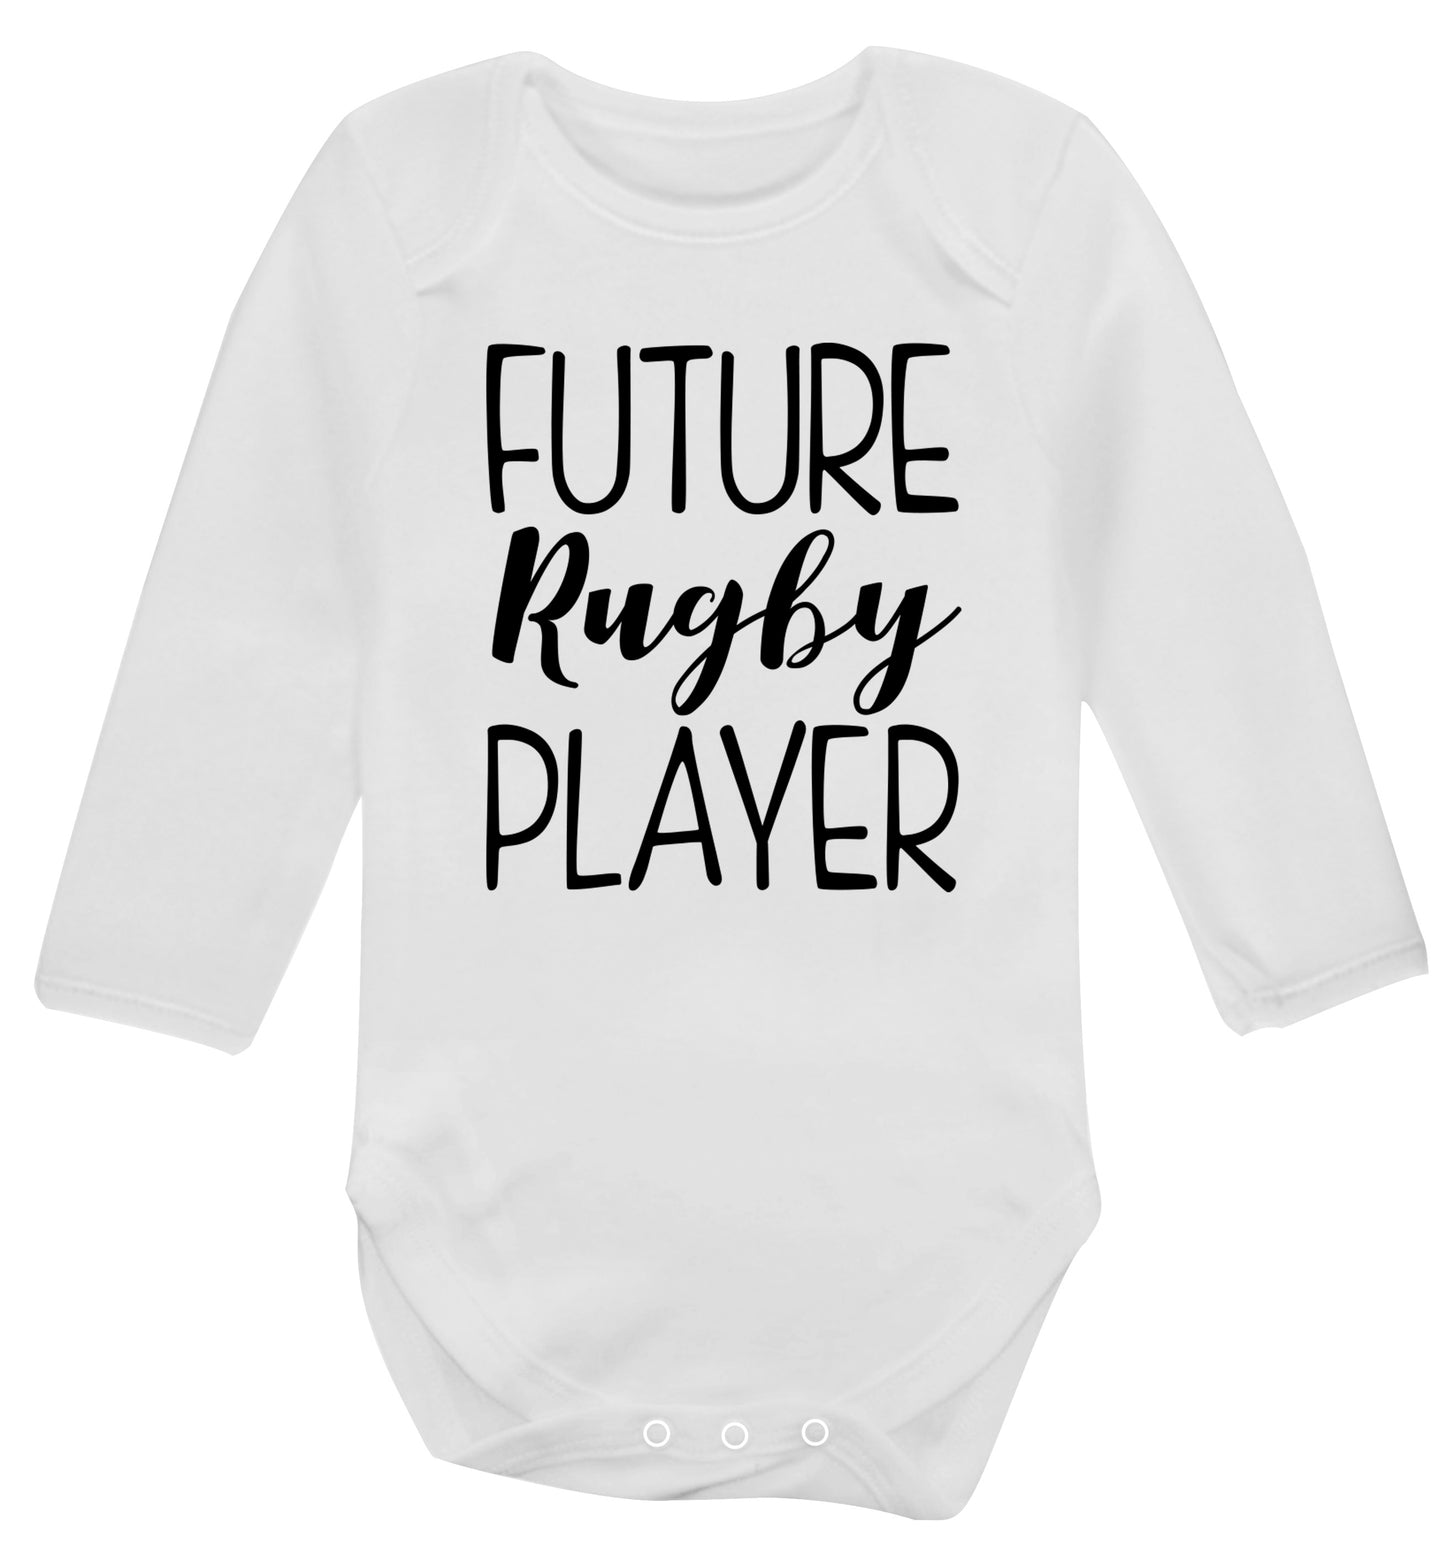 Future rugby player Baby Vest long sleeved white 6-12 months